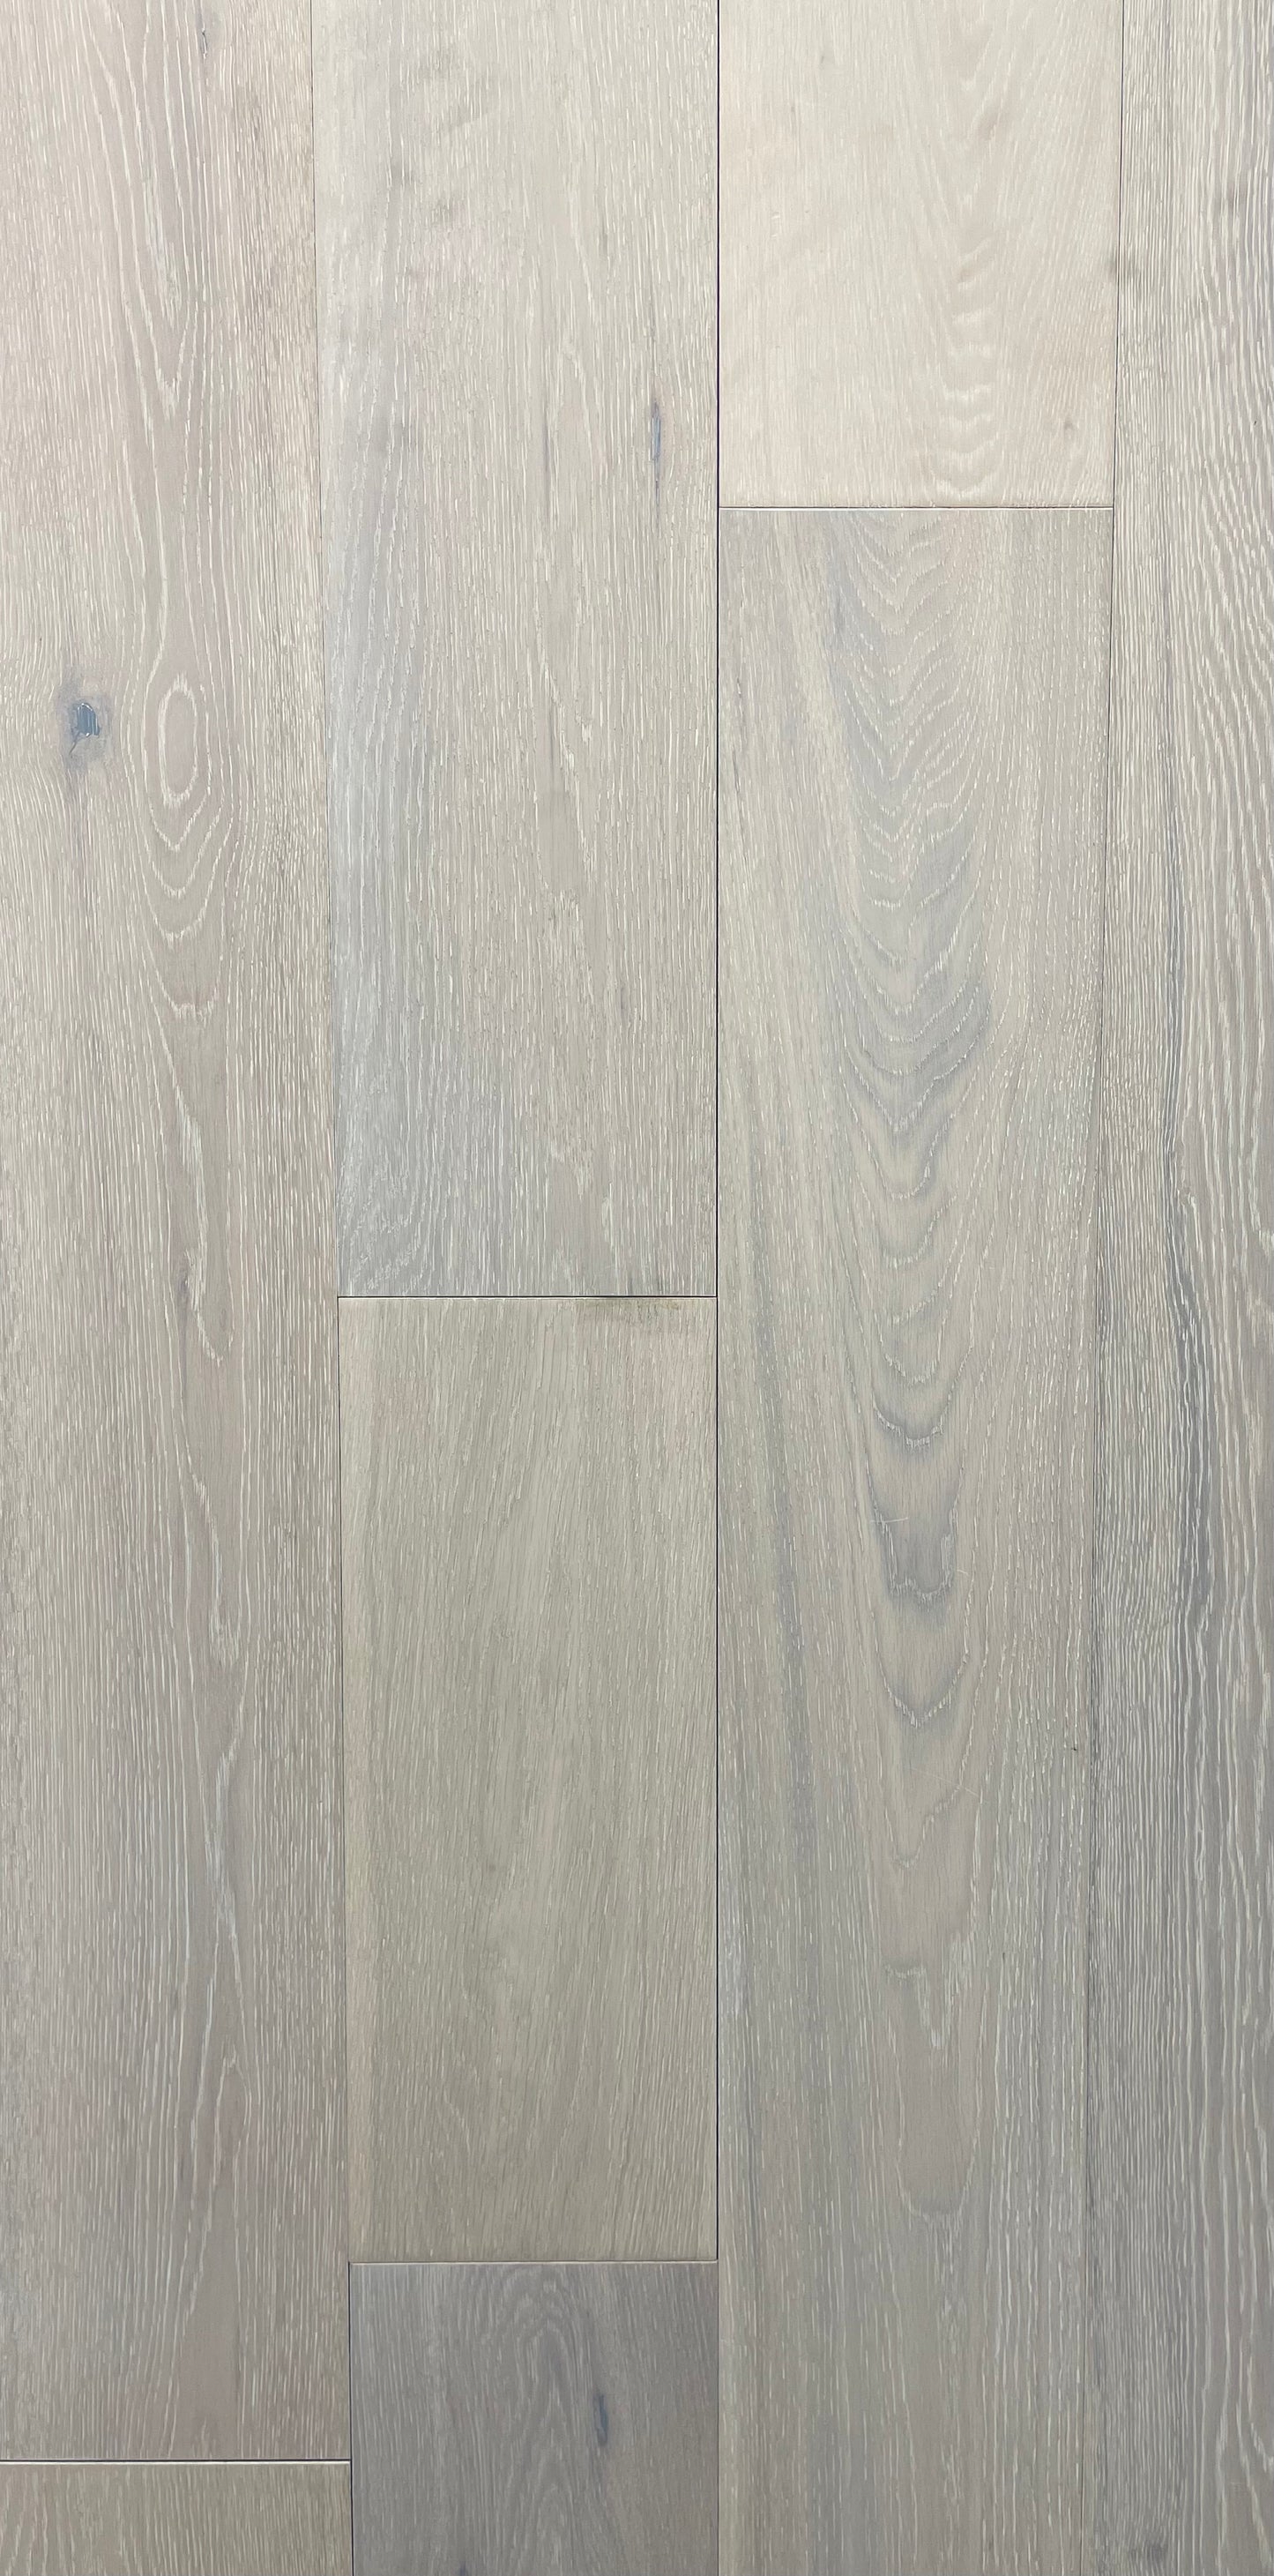 Engineered Hickory: Blizzard $6.99/sf 20.13sf/box